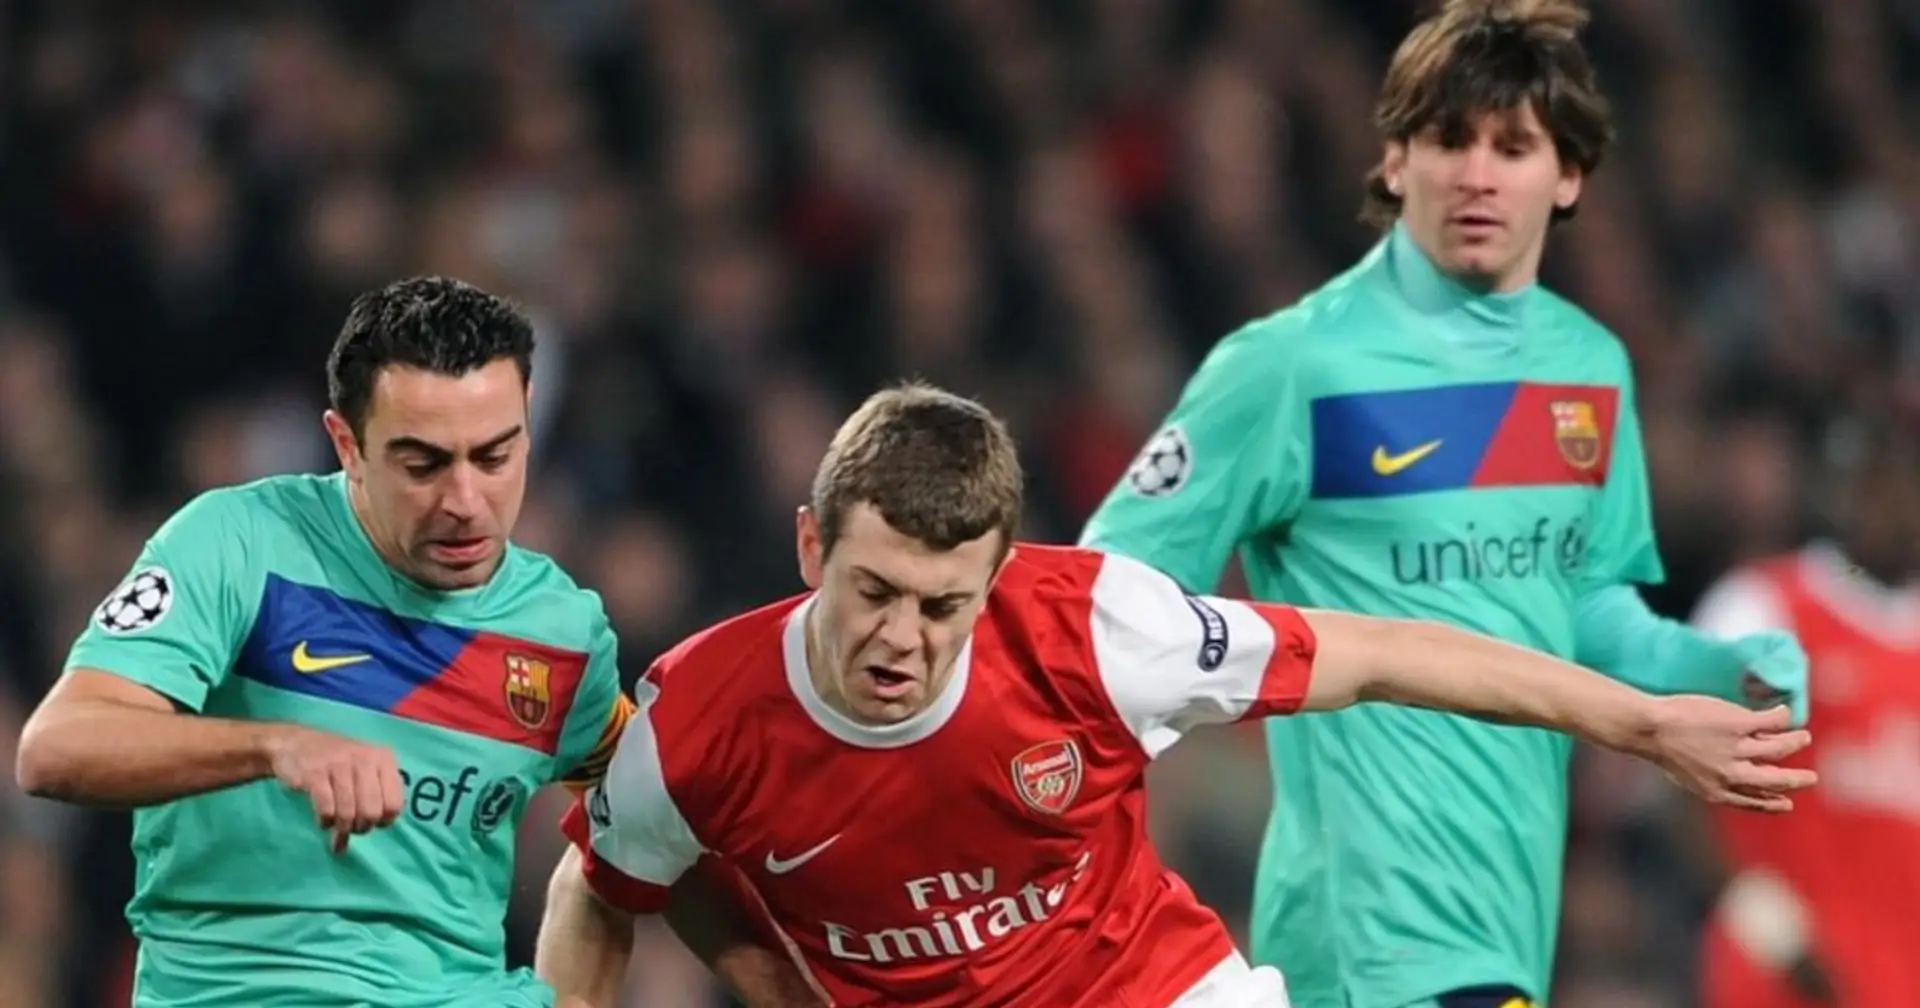 Wilshere gives hilarious response when asked who he learned most from playing vs Barcelona in 2011